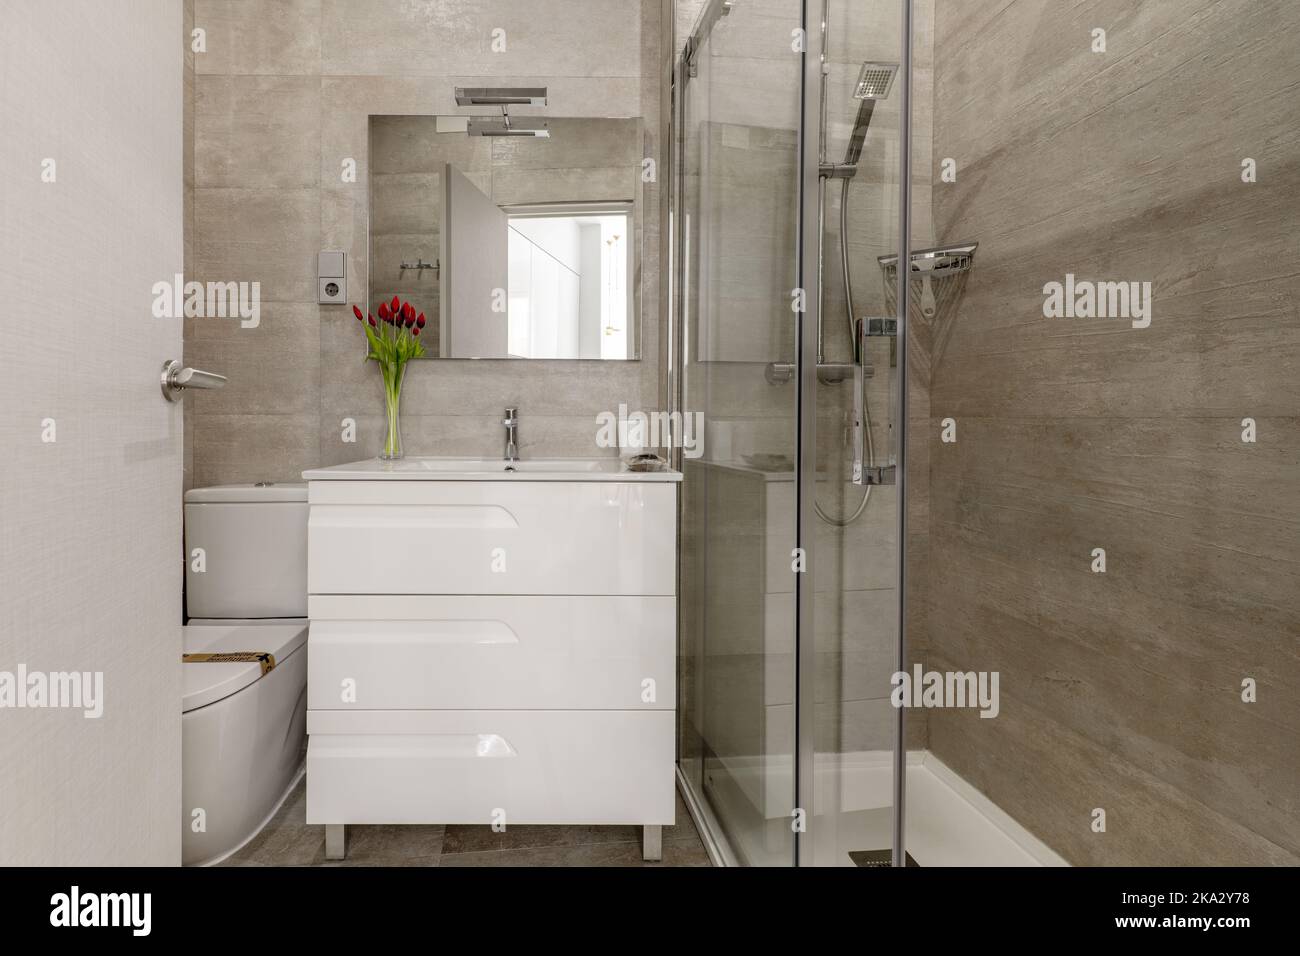 Bathroom with square mirror, white chest of drawers and glass shower stall Stock Photo